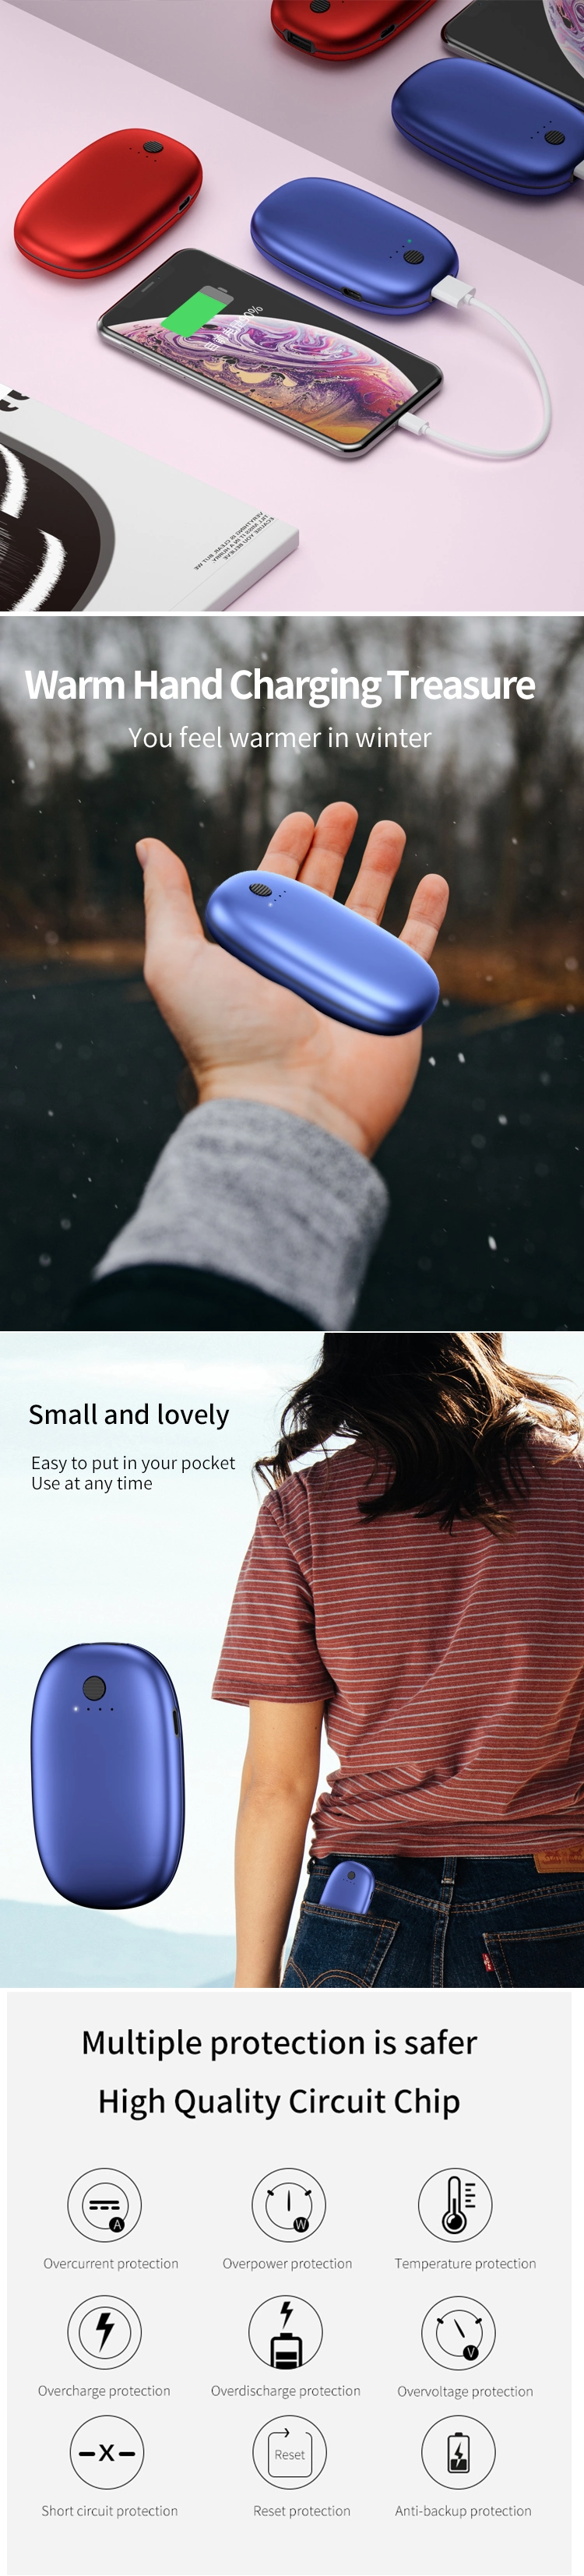 Linli Winter Gifts Portable Pocket Mini Quick Heating Electric USB Rechargeable Hand Warmer